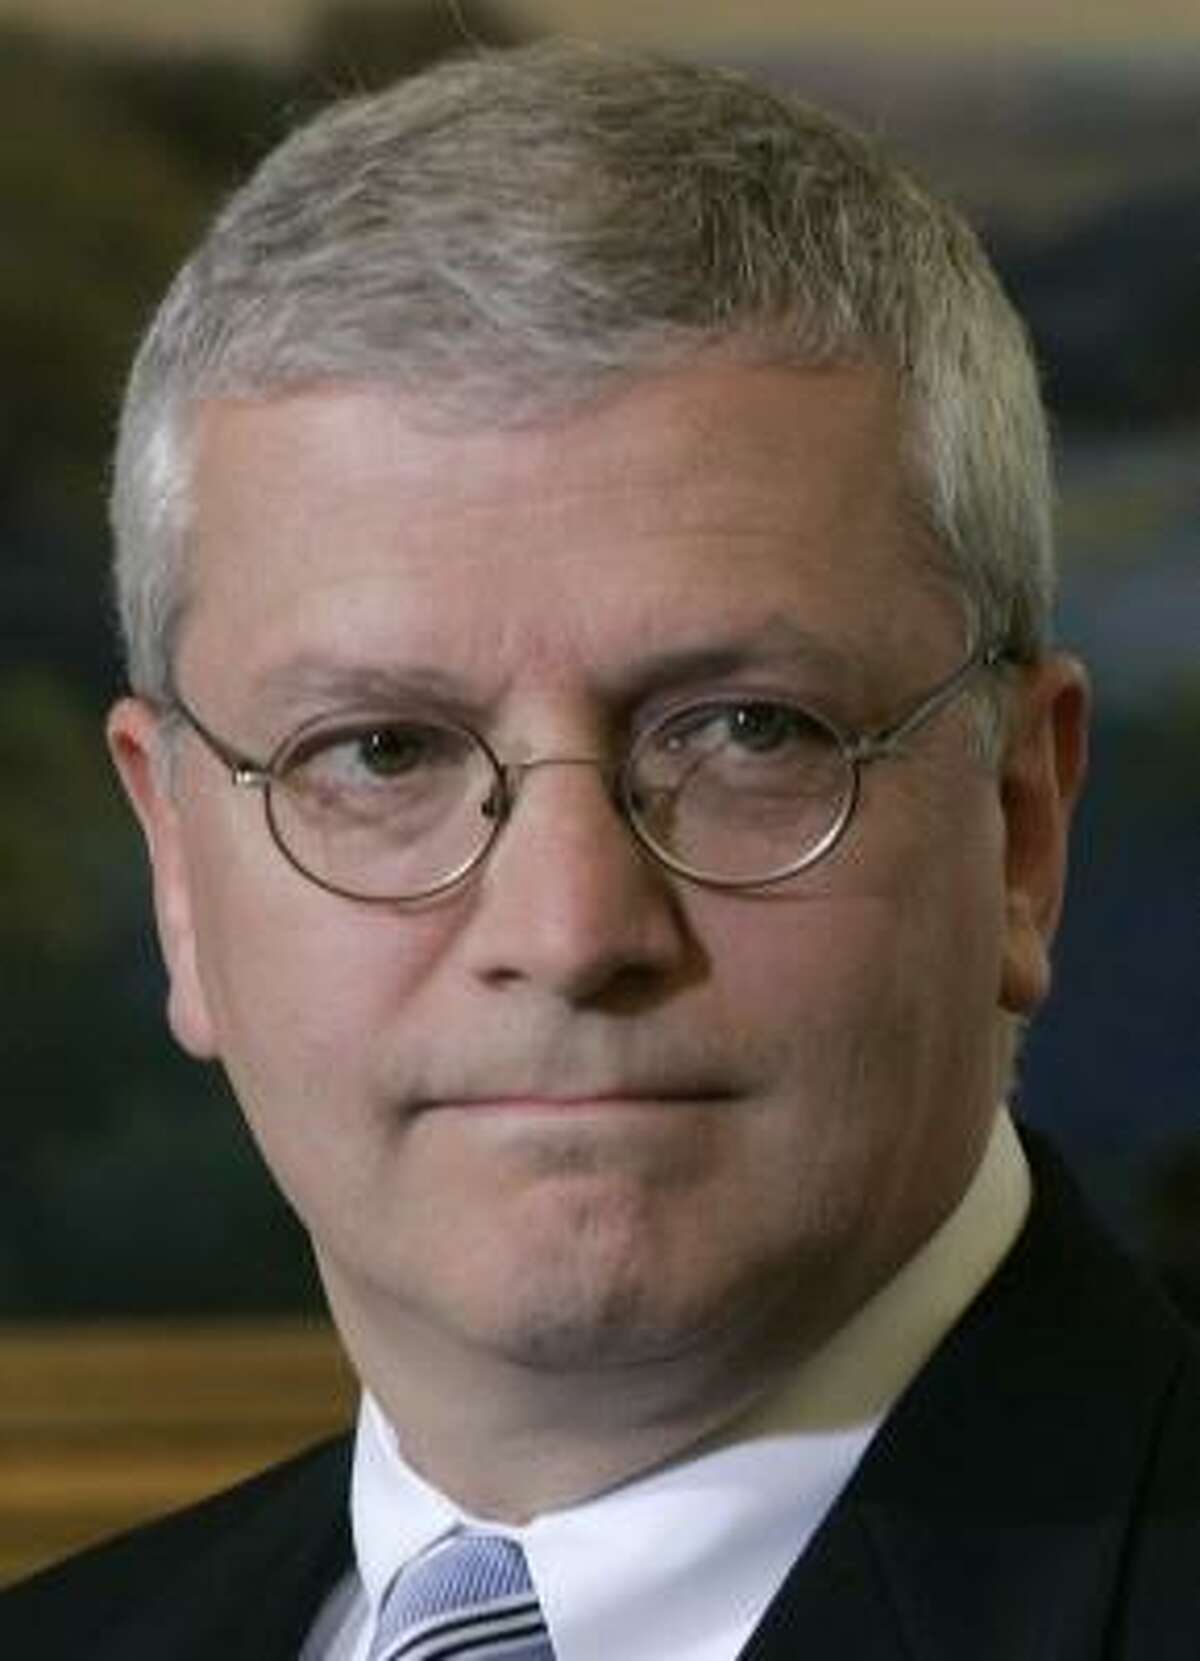 Joshua Bolten served as White House chief of staff.